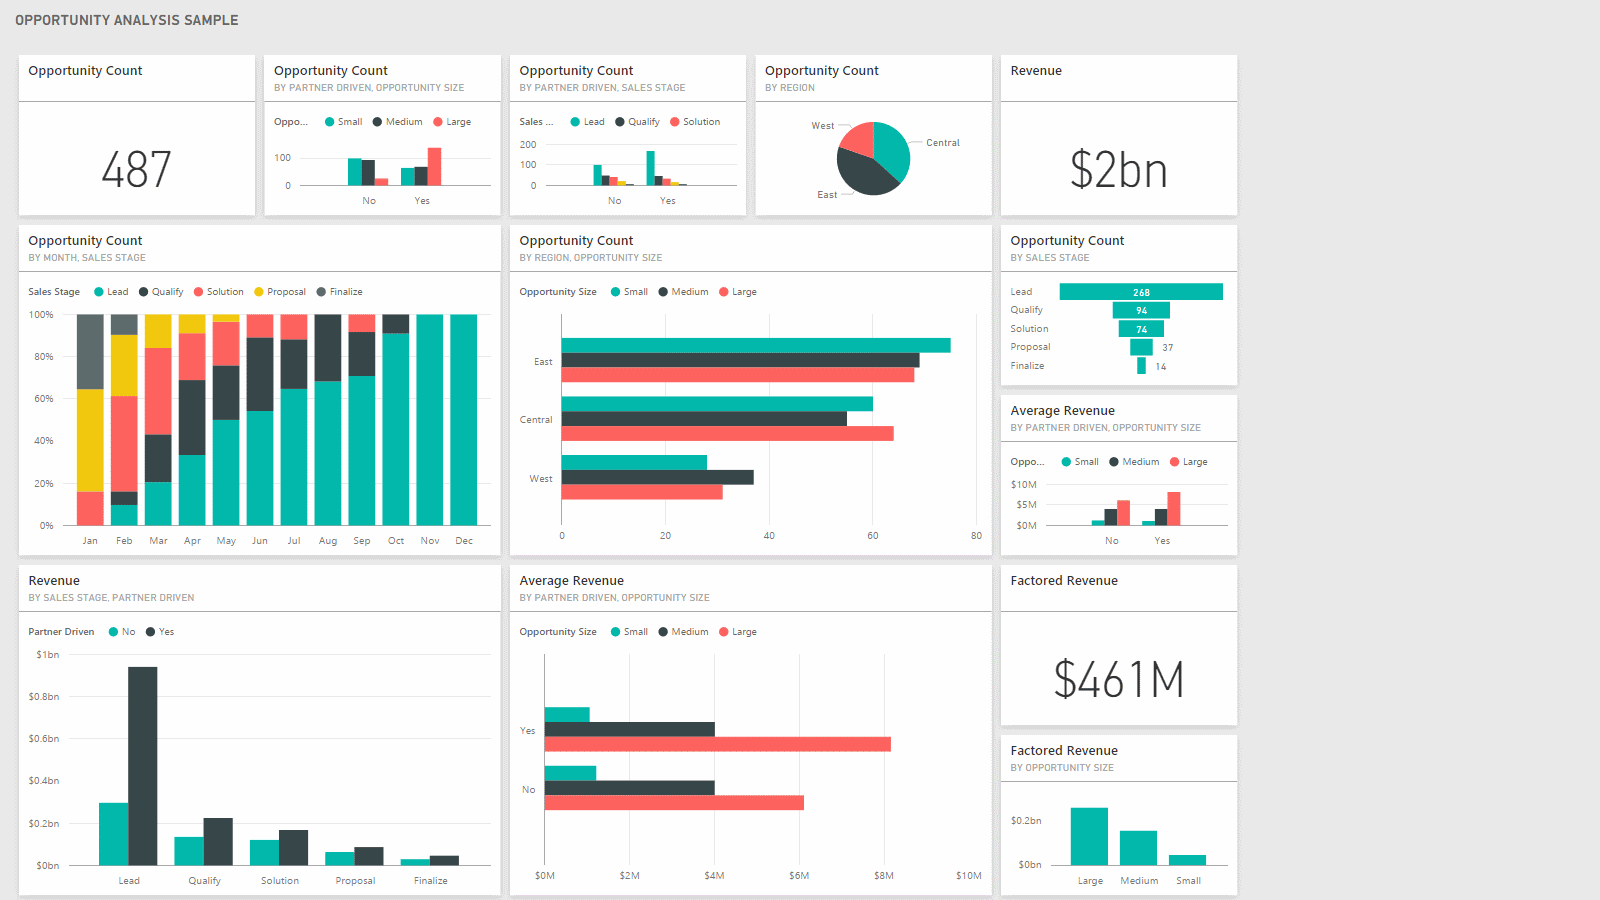 Dashboard: OPPORTUNITY ANALYSIS